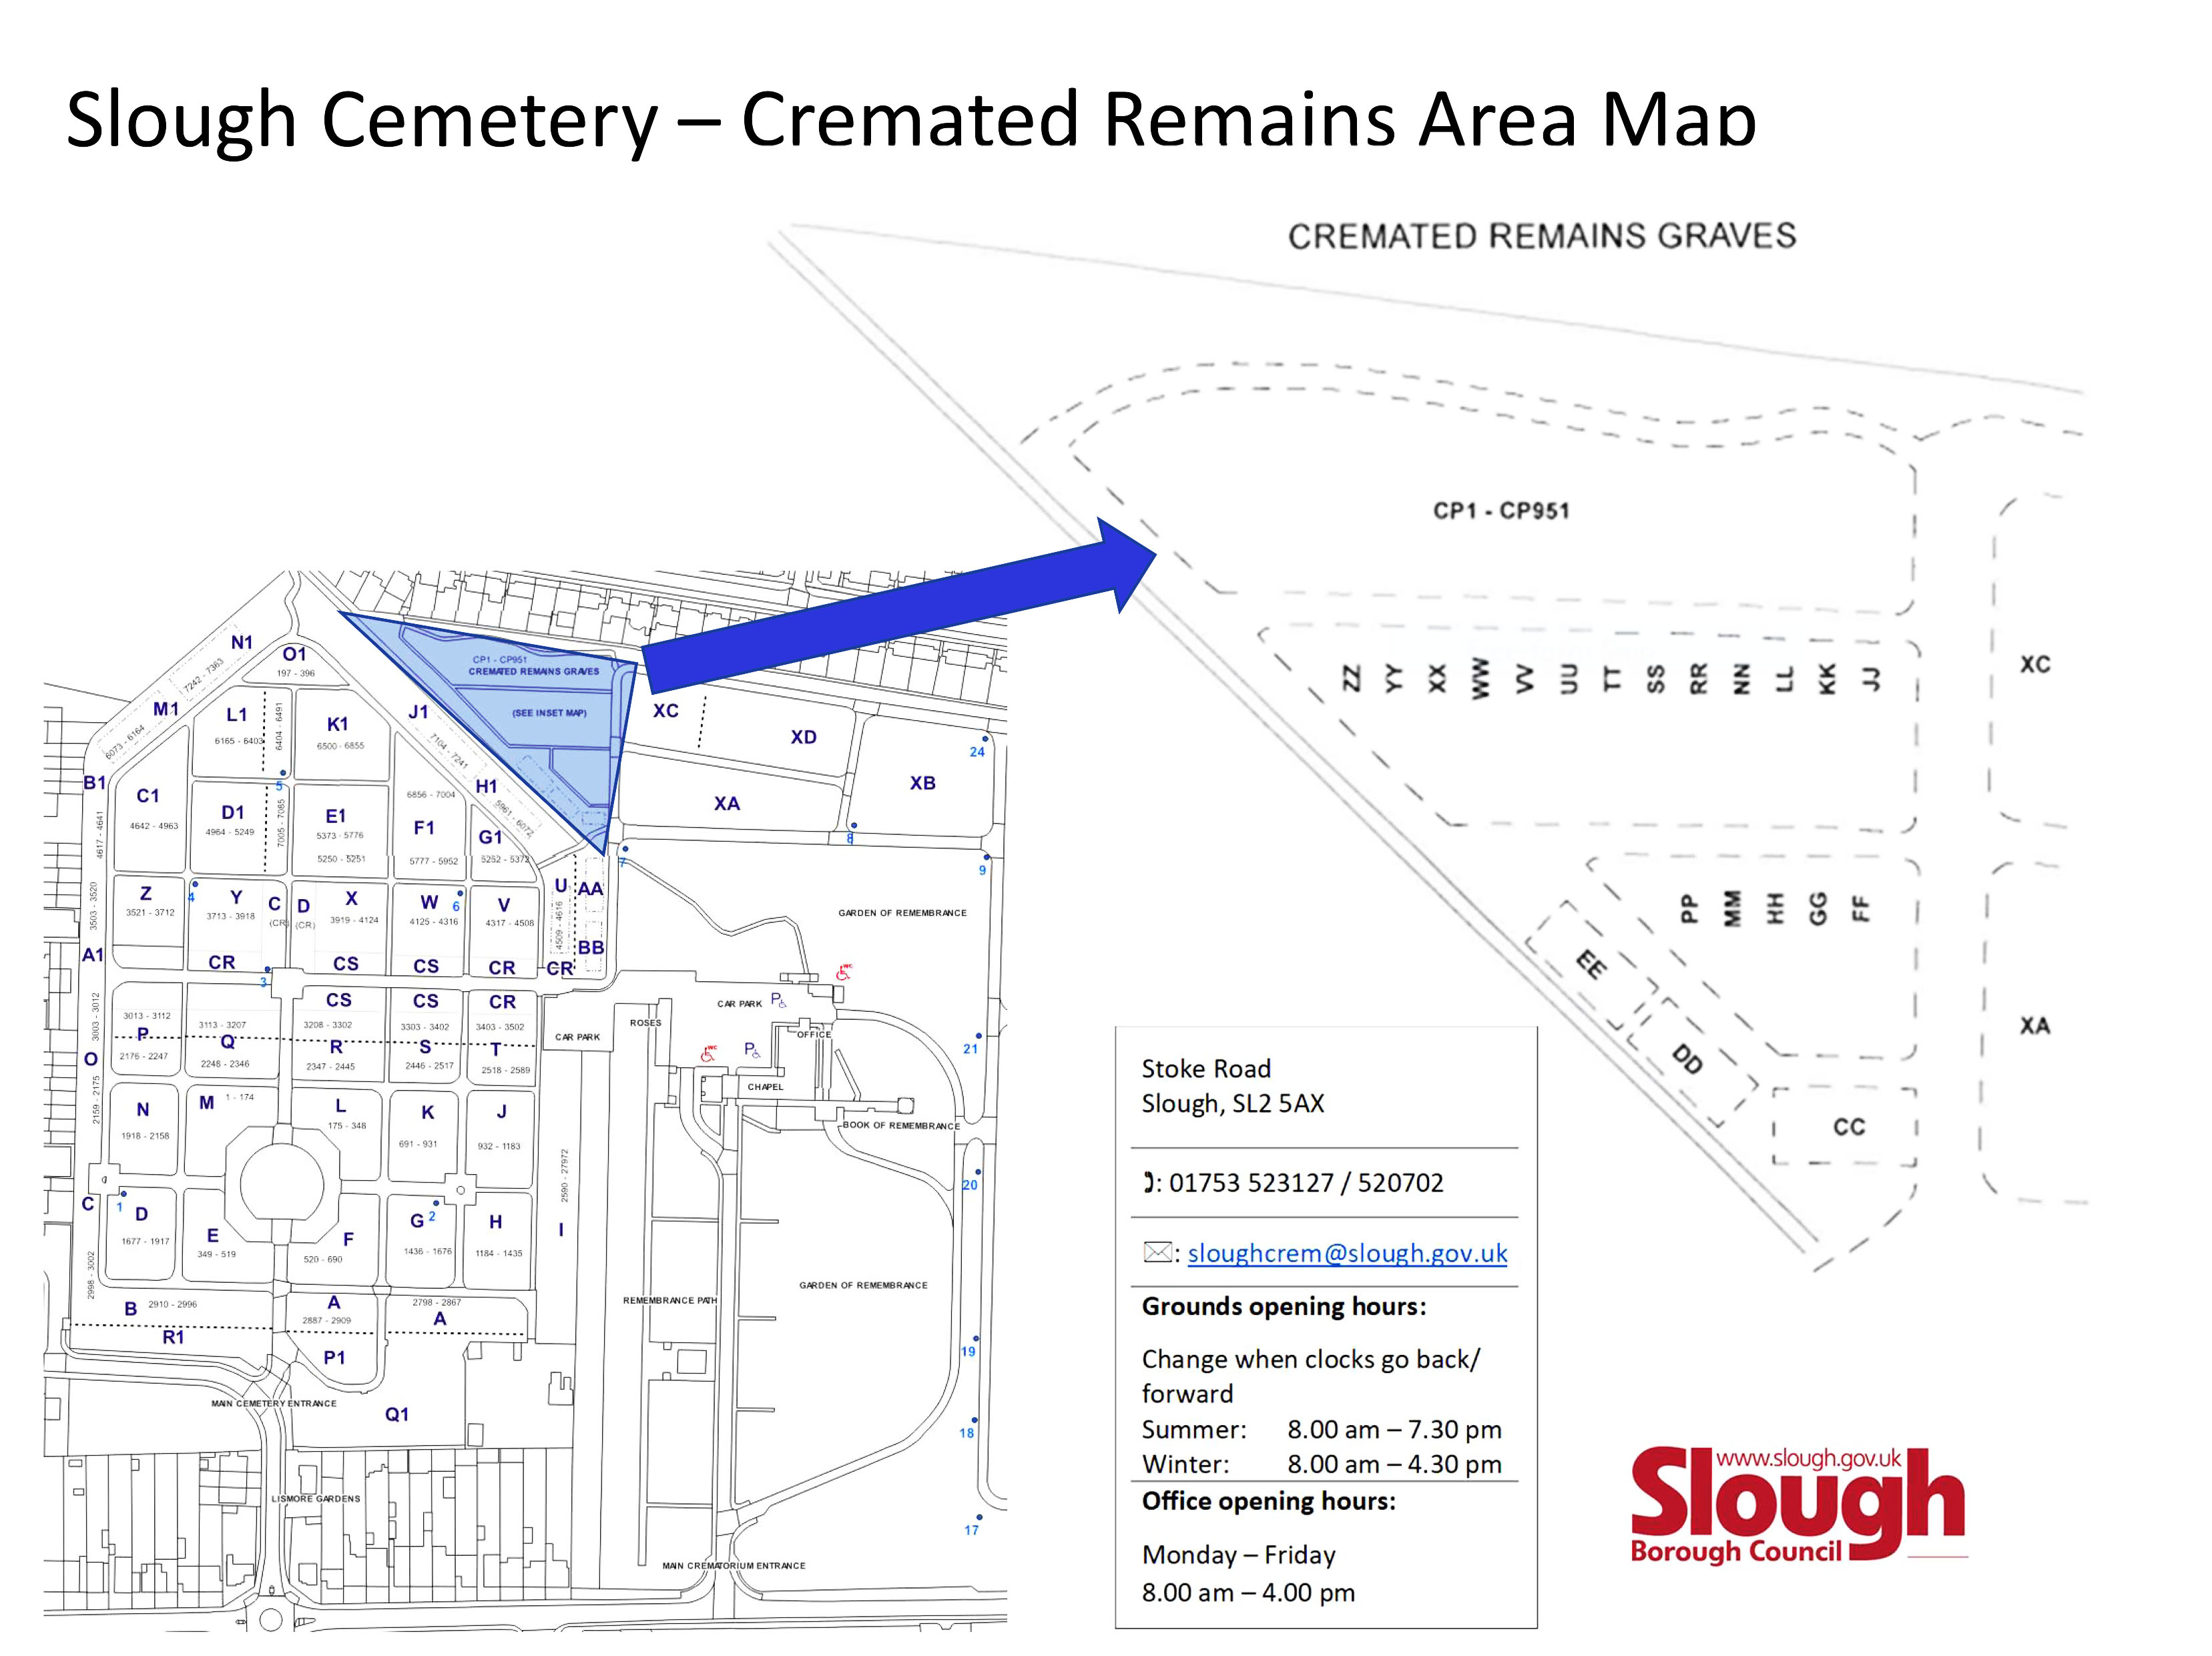 Map of cremated remains area at Slough cemetery